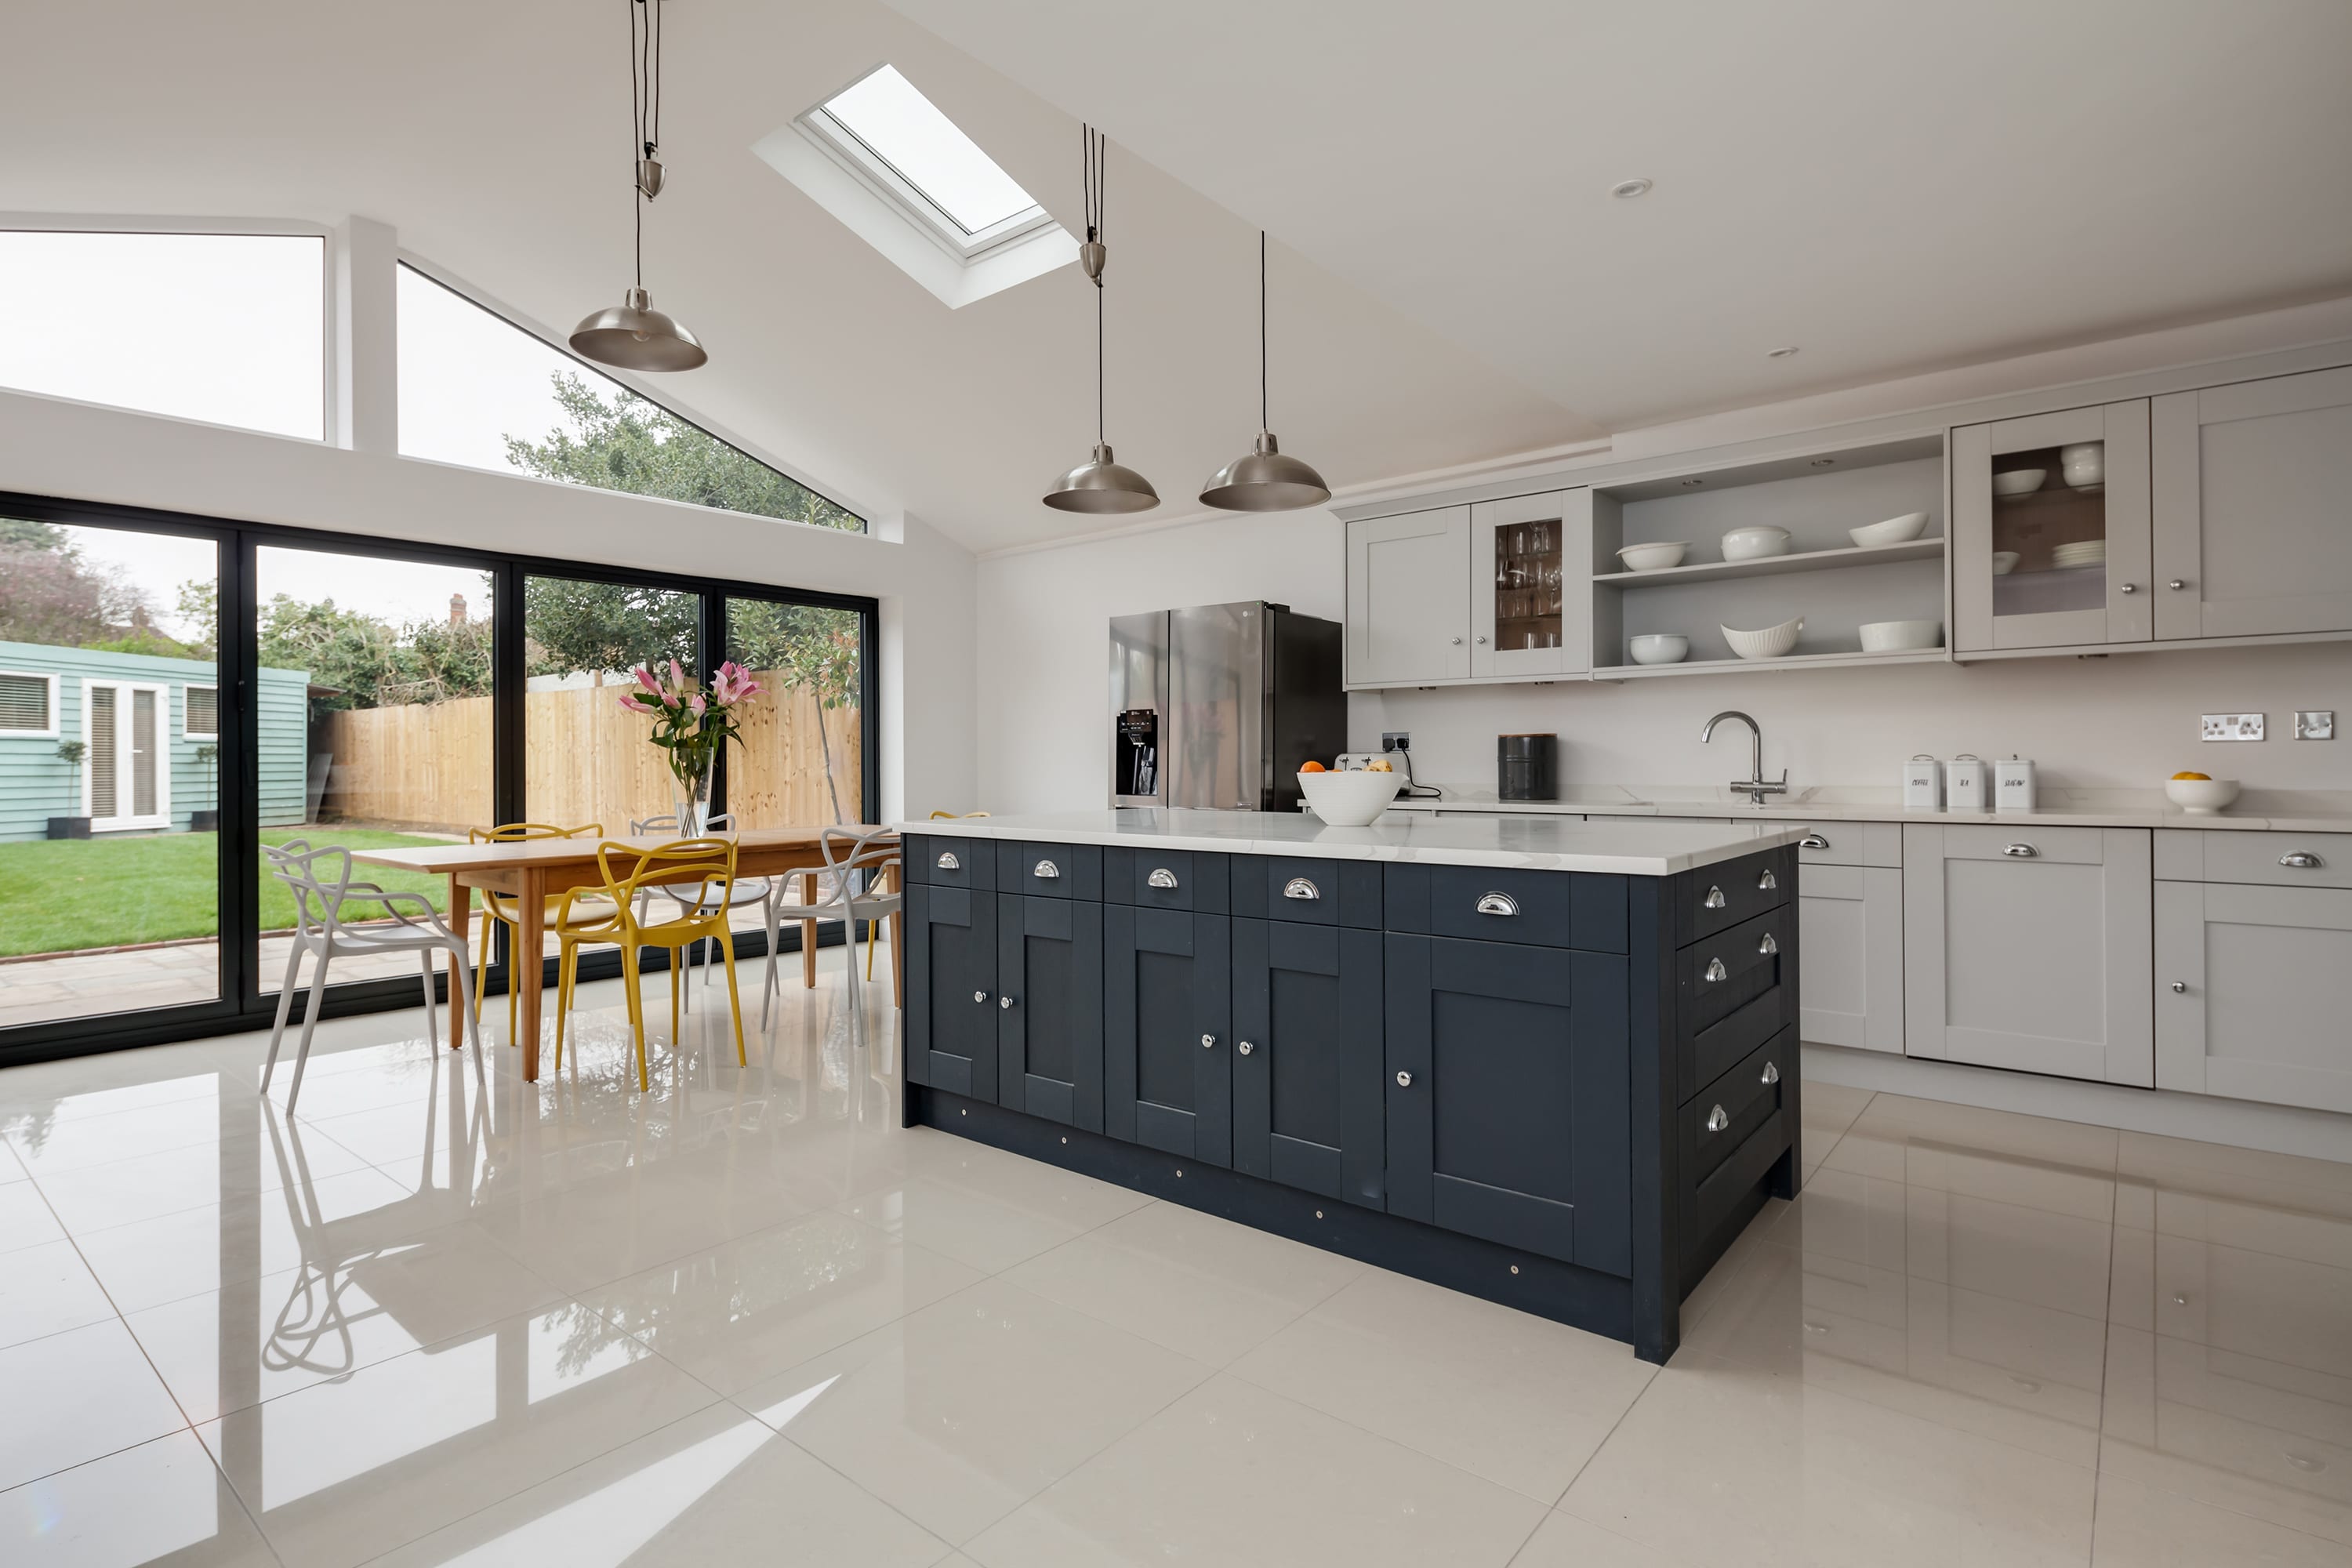 Kitchen Flooring Ideas  The Top 12 Trends of The Year - Décor Aid